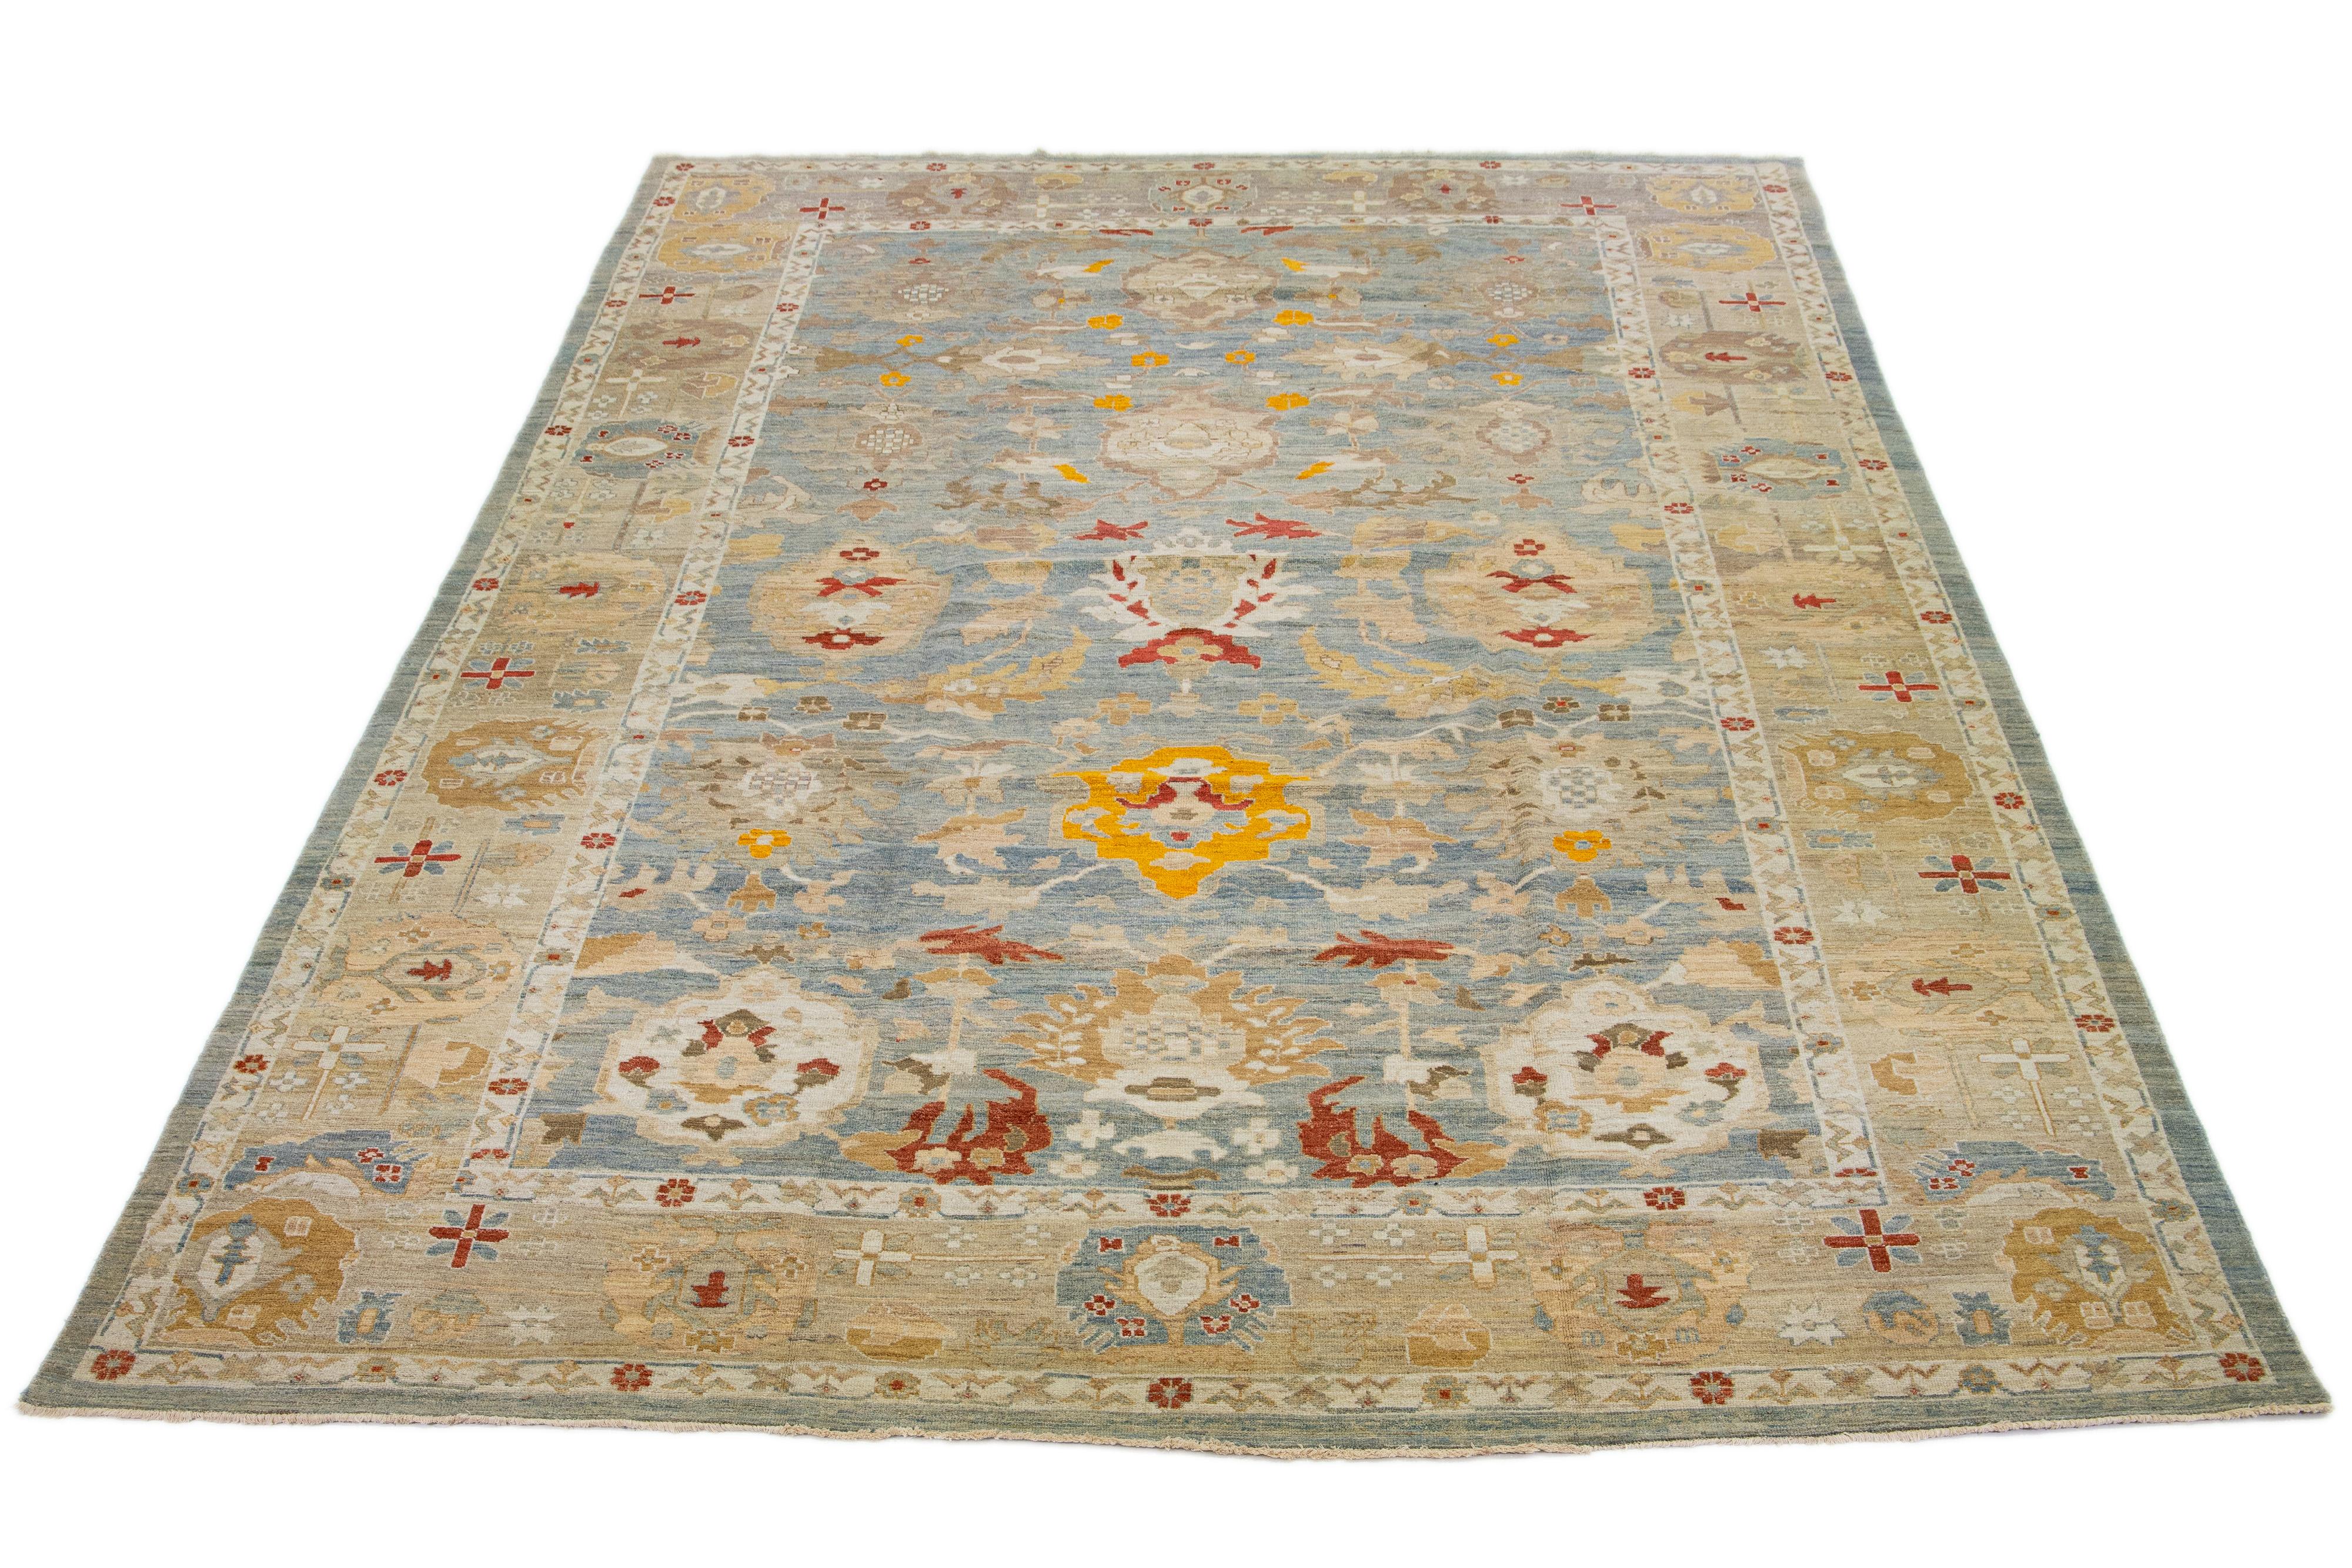 A stunning, contemporary Sultanabad rug made of oversized wool. It features a blue field adorned with multicolored accents and an all-over floral design.

This rug measures 11'10